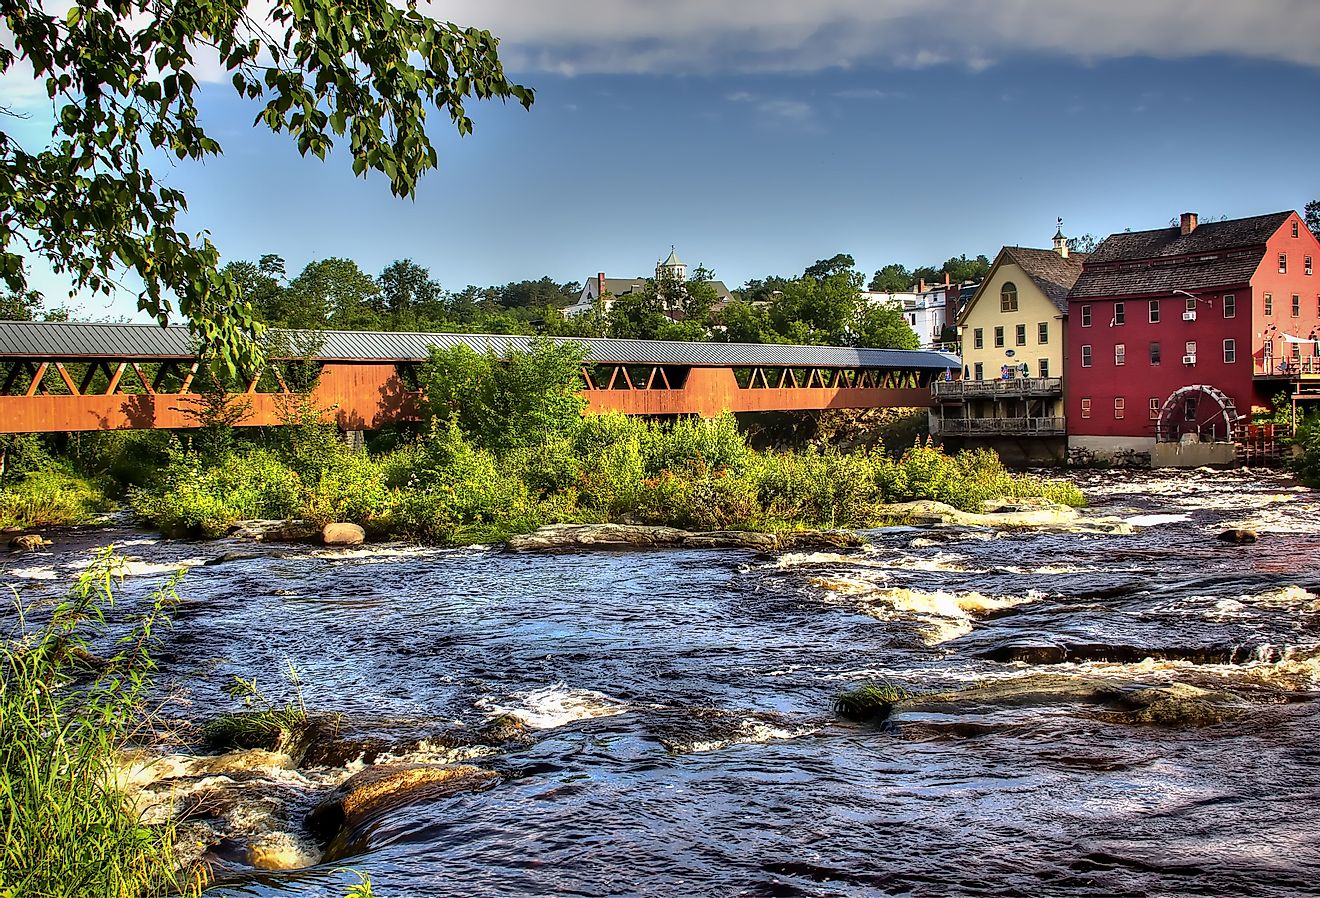 The River Walk Covered Bridge with the Grist mill on the Ammonoosuc River in Littleton, New Hampshire.